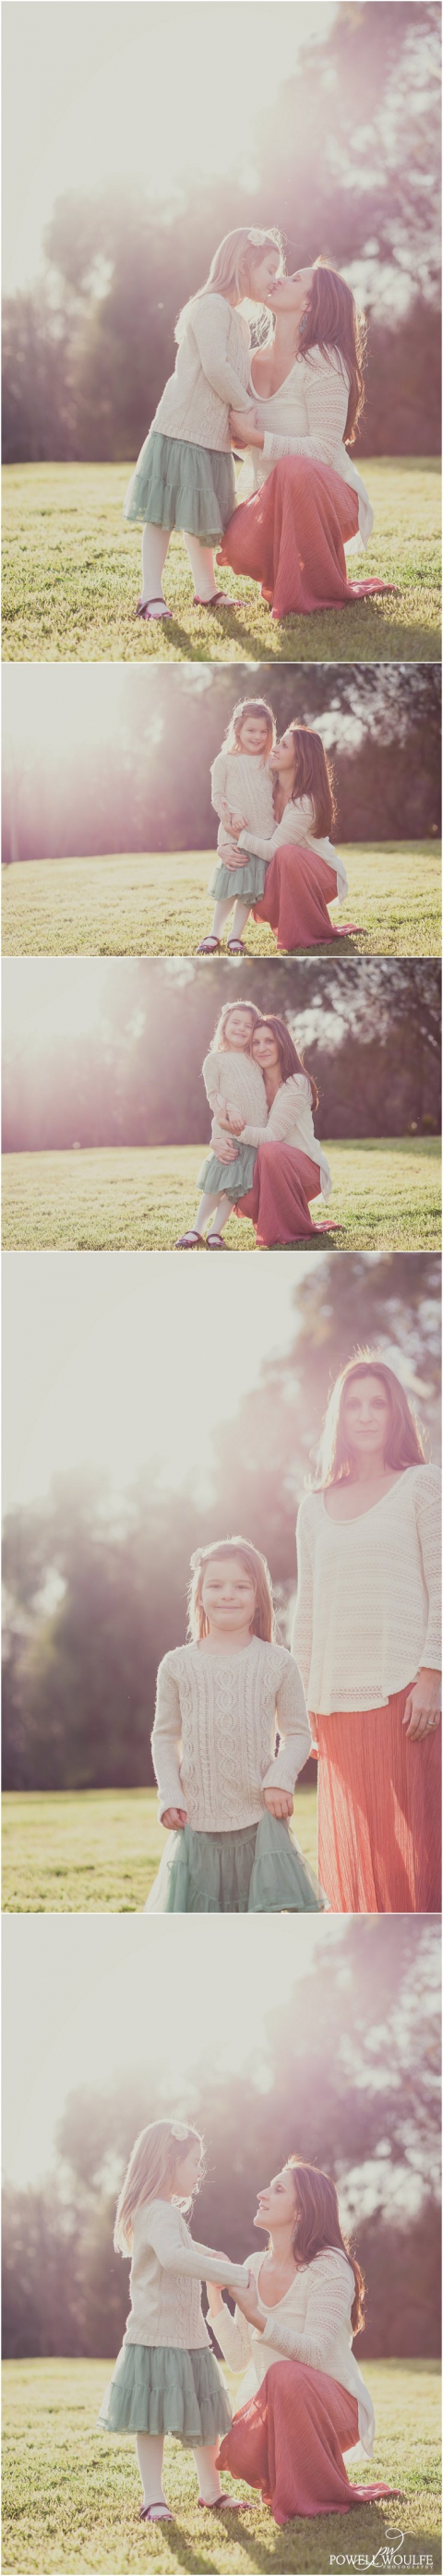 San Diego Mother + Daughter Portraits